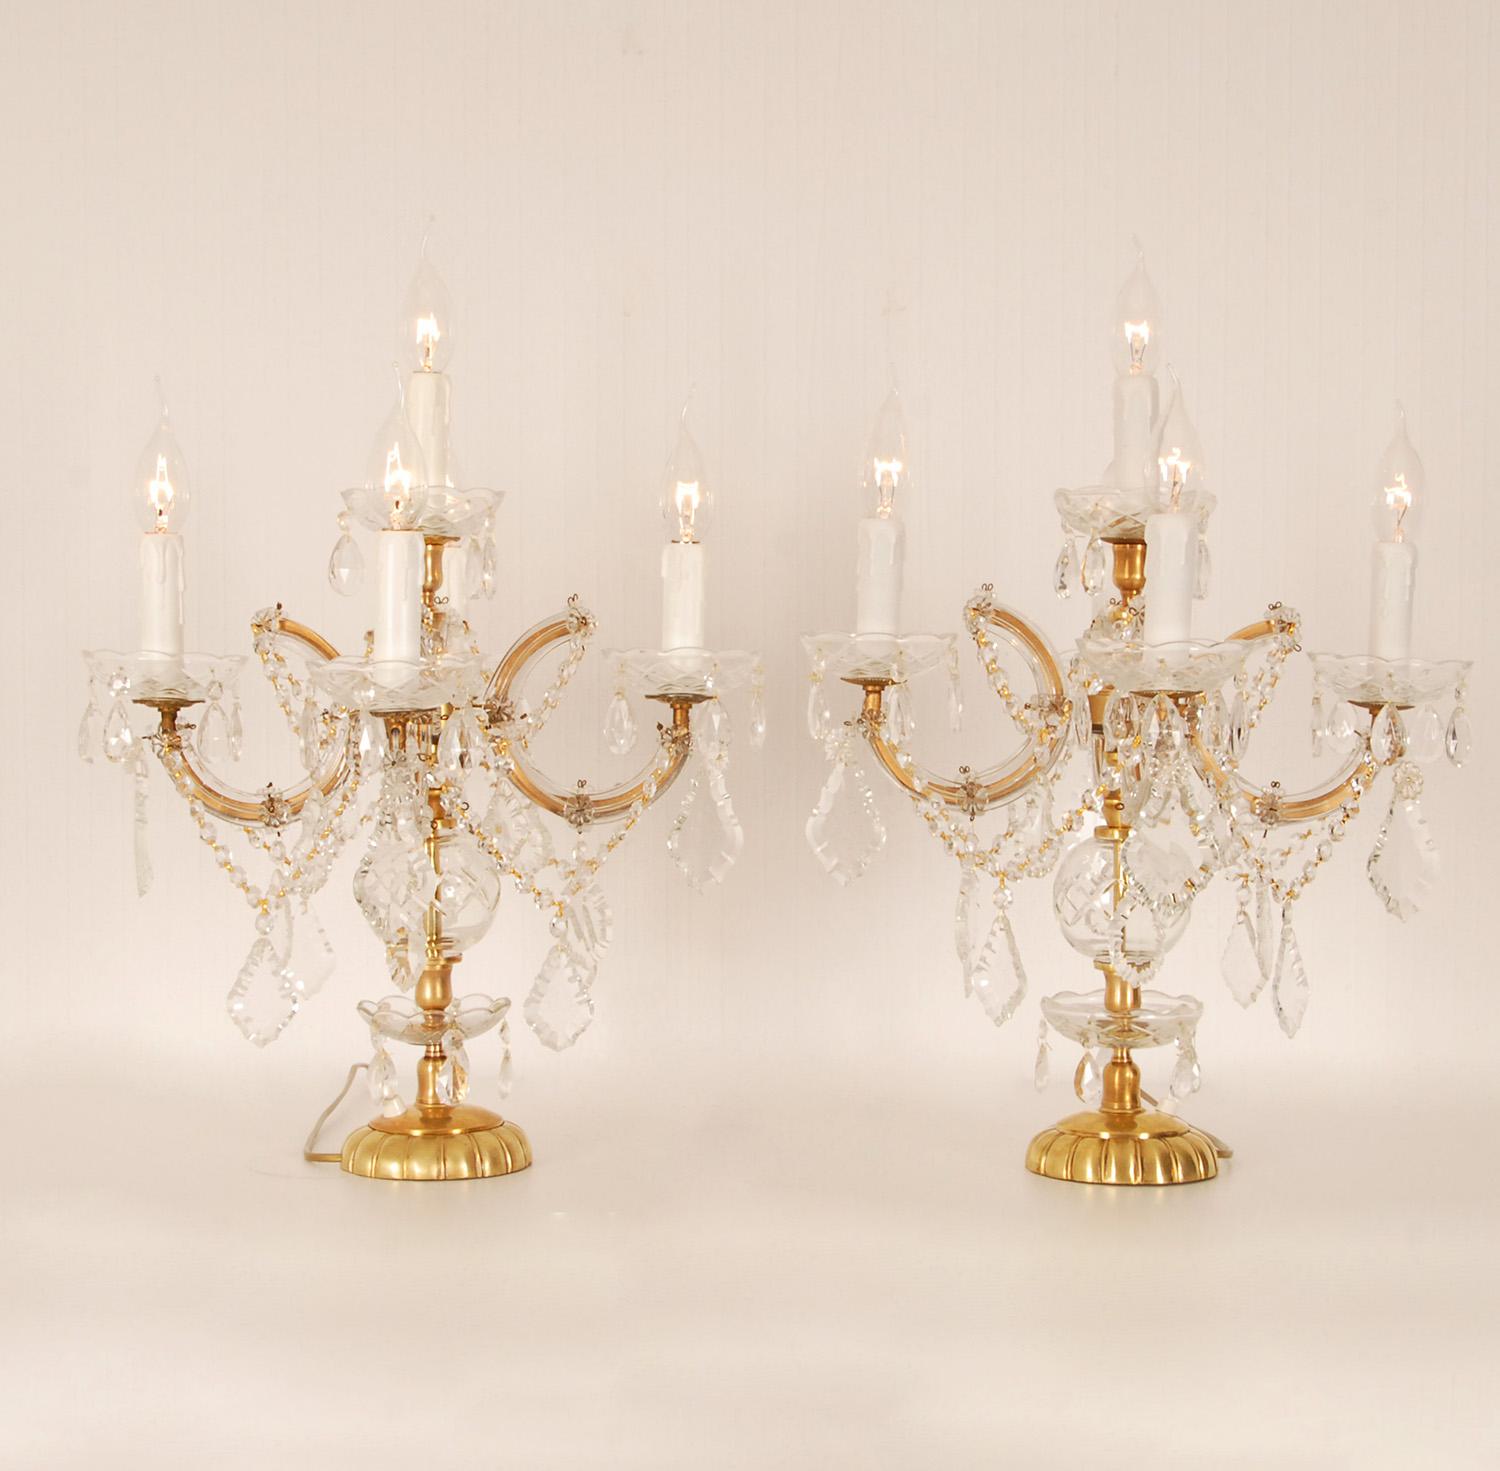 Hand-Crafted Vintage Crystal Lamps Marie Therese Gold Gilded Brass Crystal Table Lamps a Pair